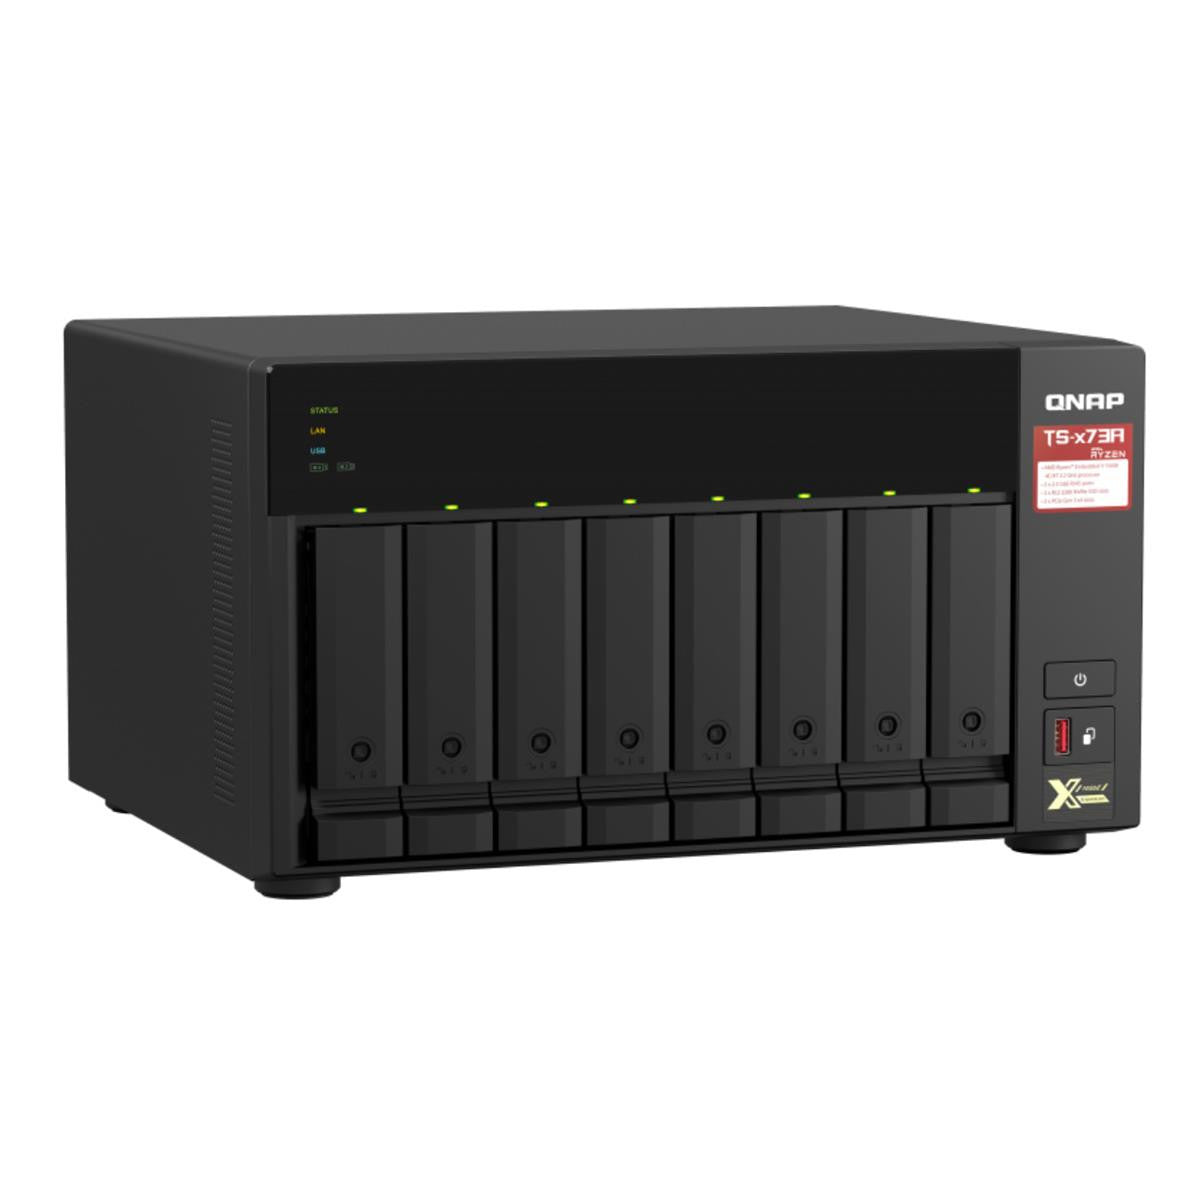 QNAP TS-873A 8-BAY NAS with 32GB DDR4 RAM and 16TB (8x2TB) Western Digital RED PLUS Drives Fully Assembled and Tested